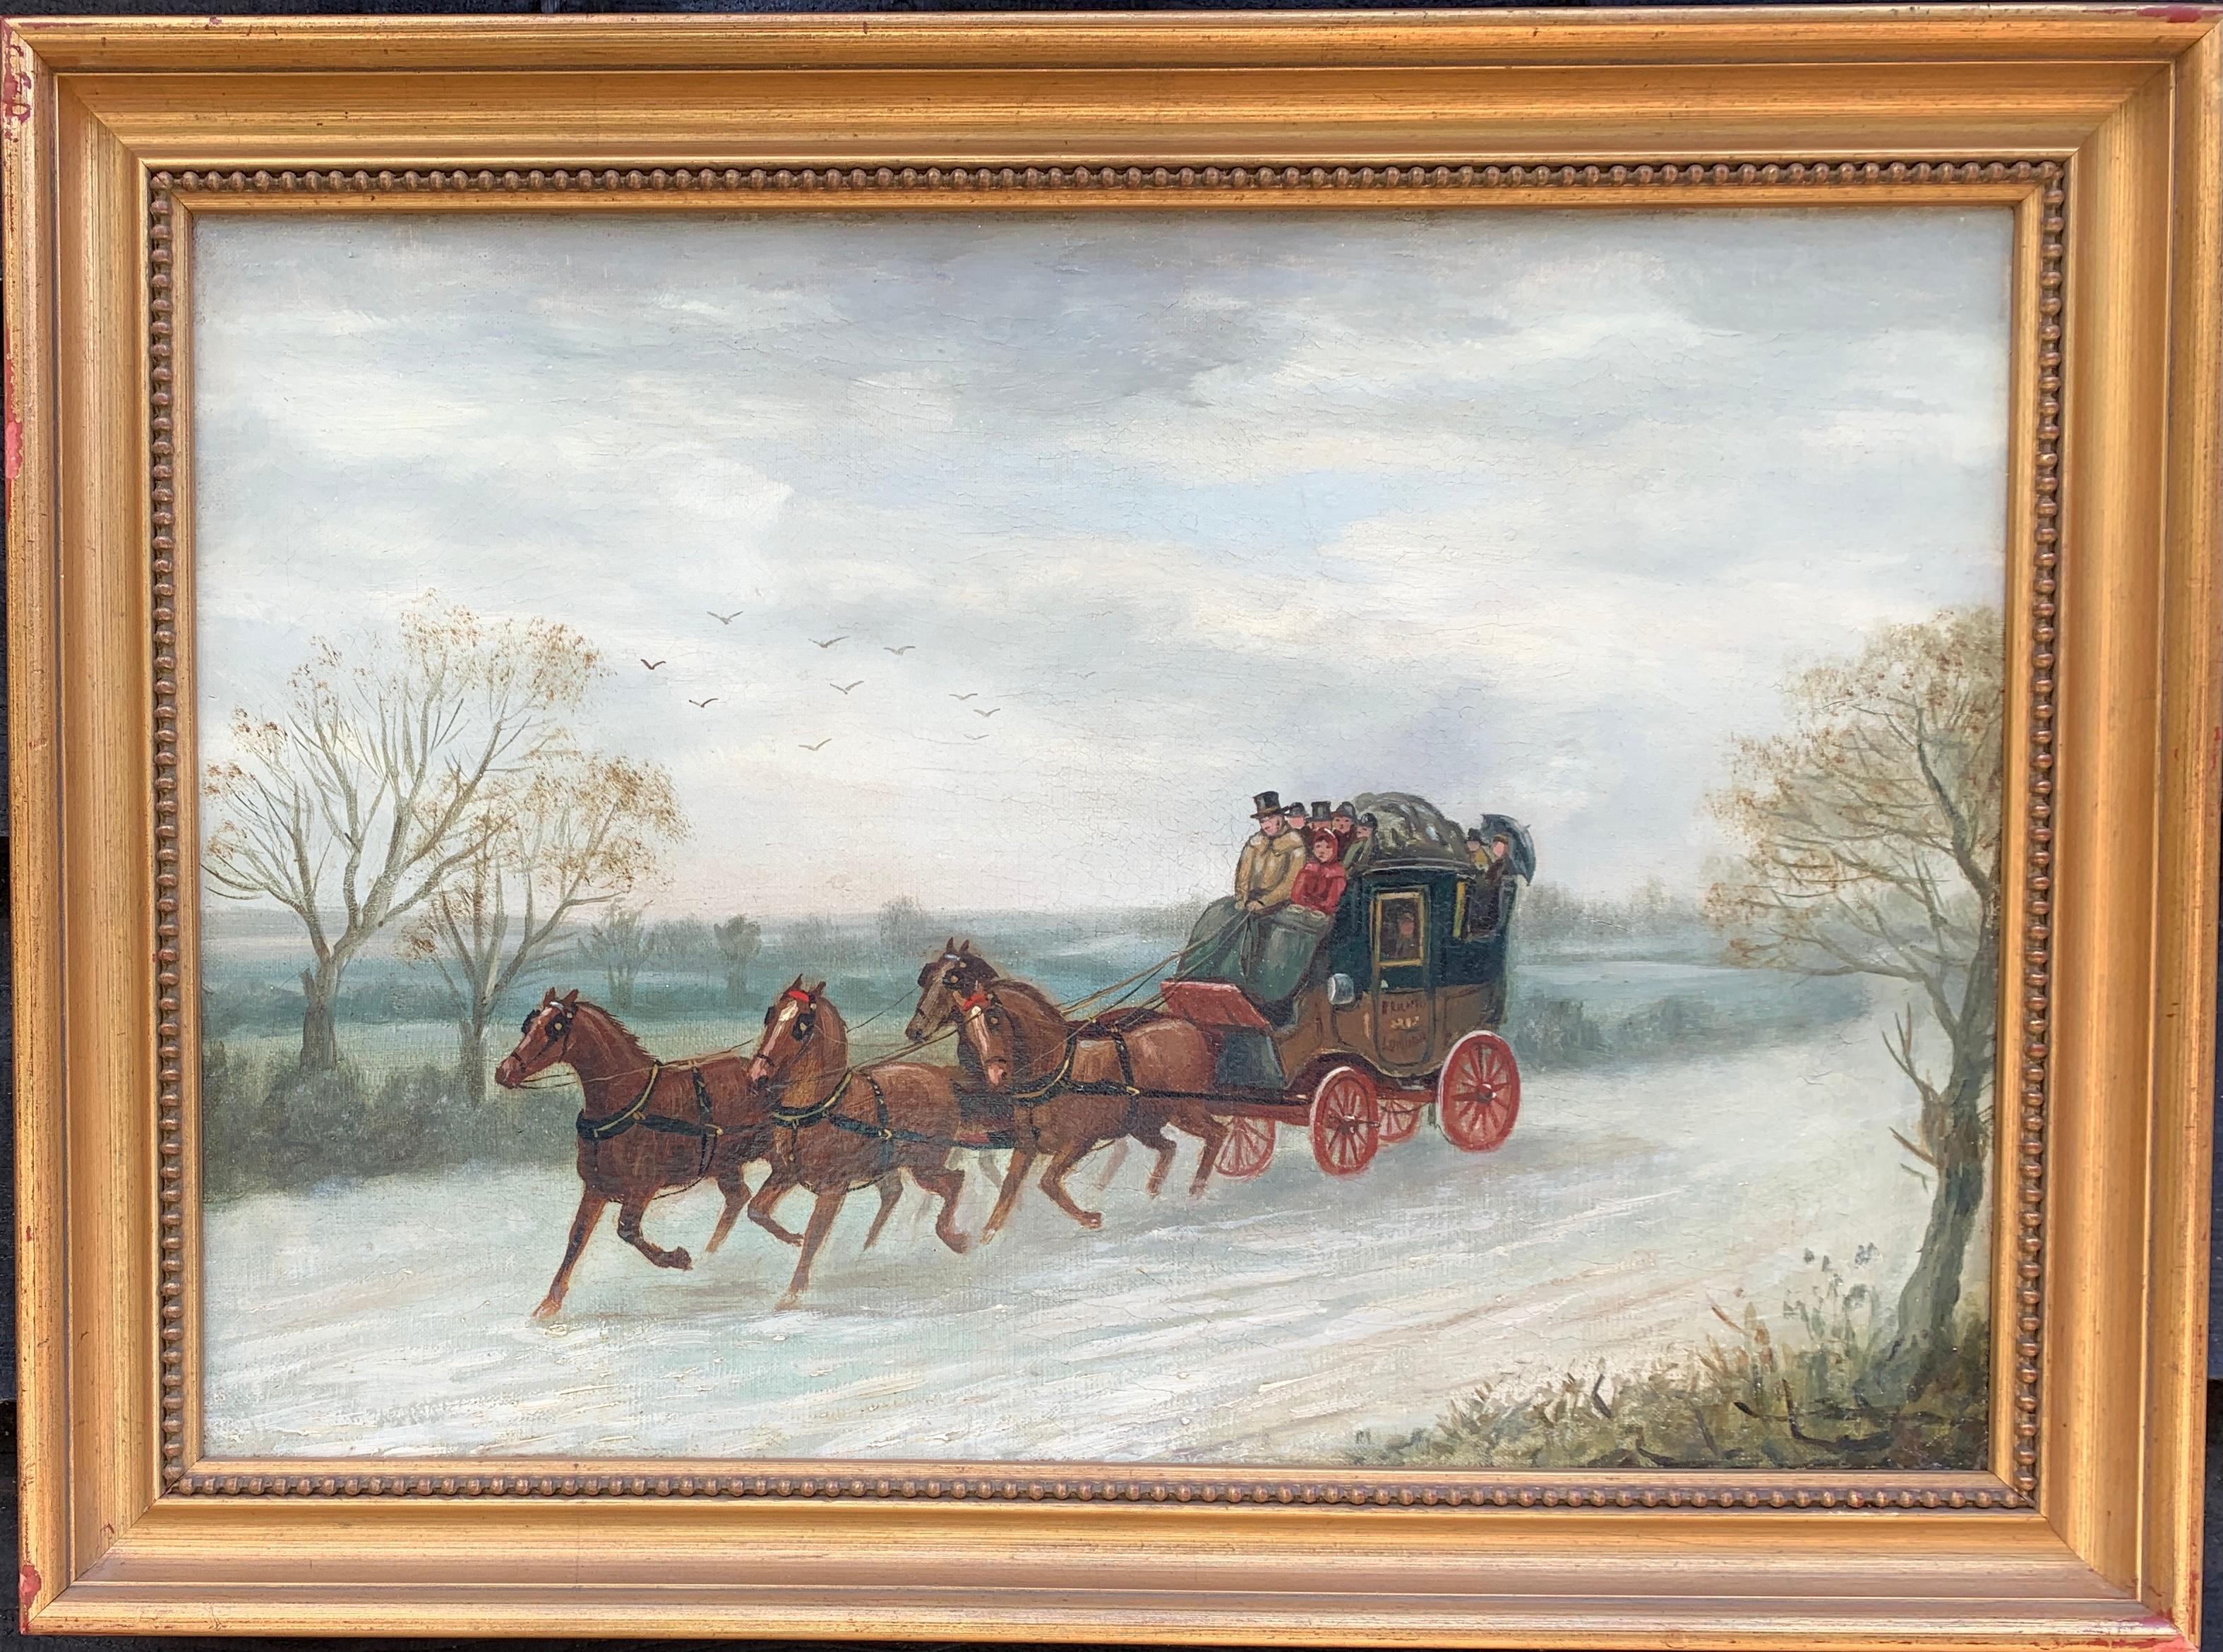 Unknown Figurative Painting - 19th century Victorian English mail coach with horses in a landscape